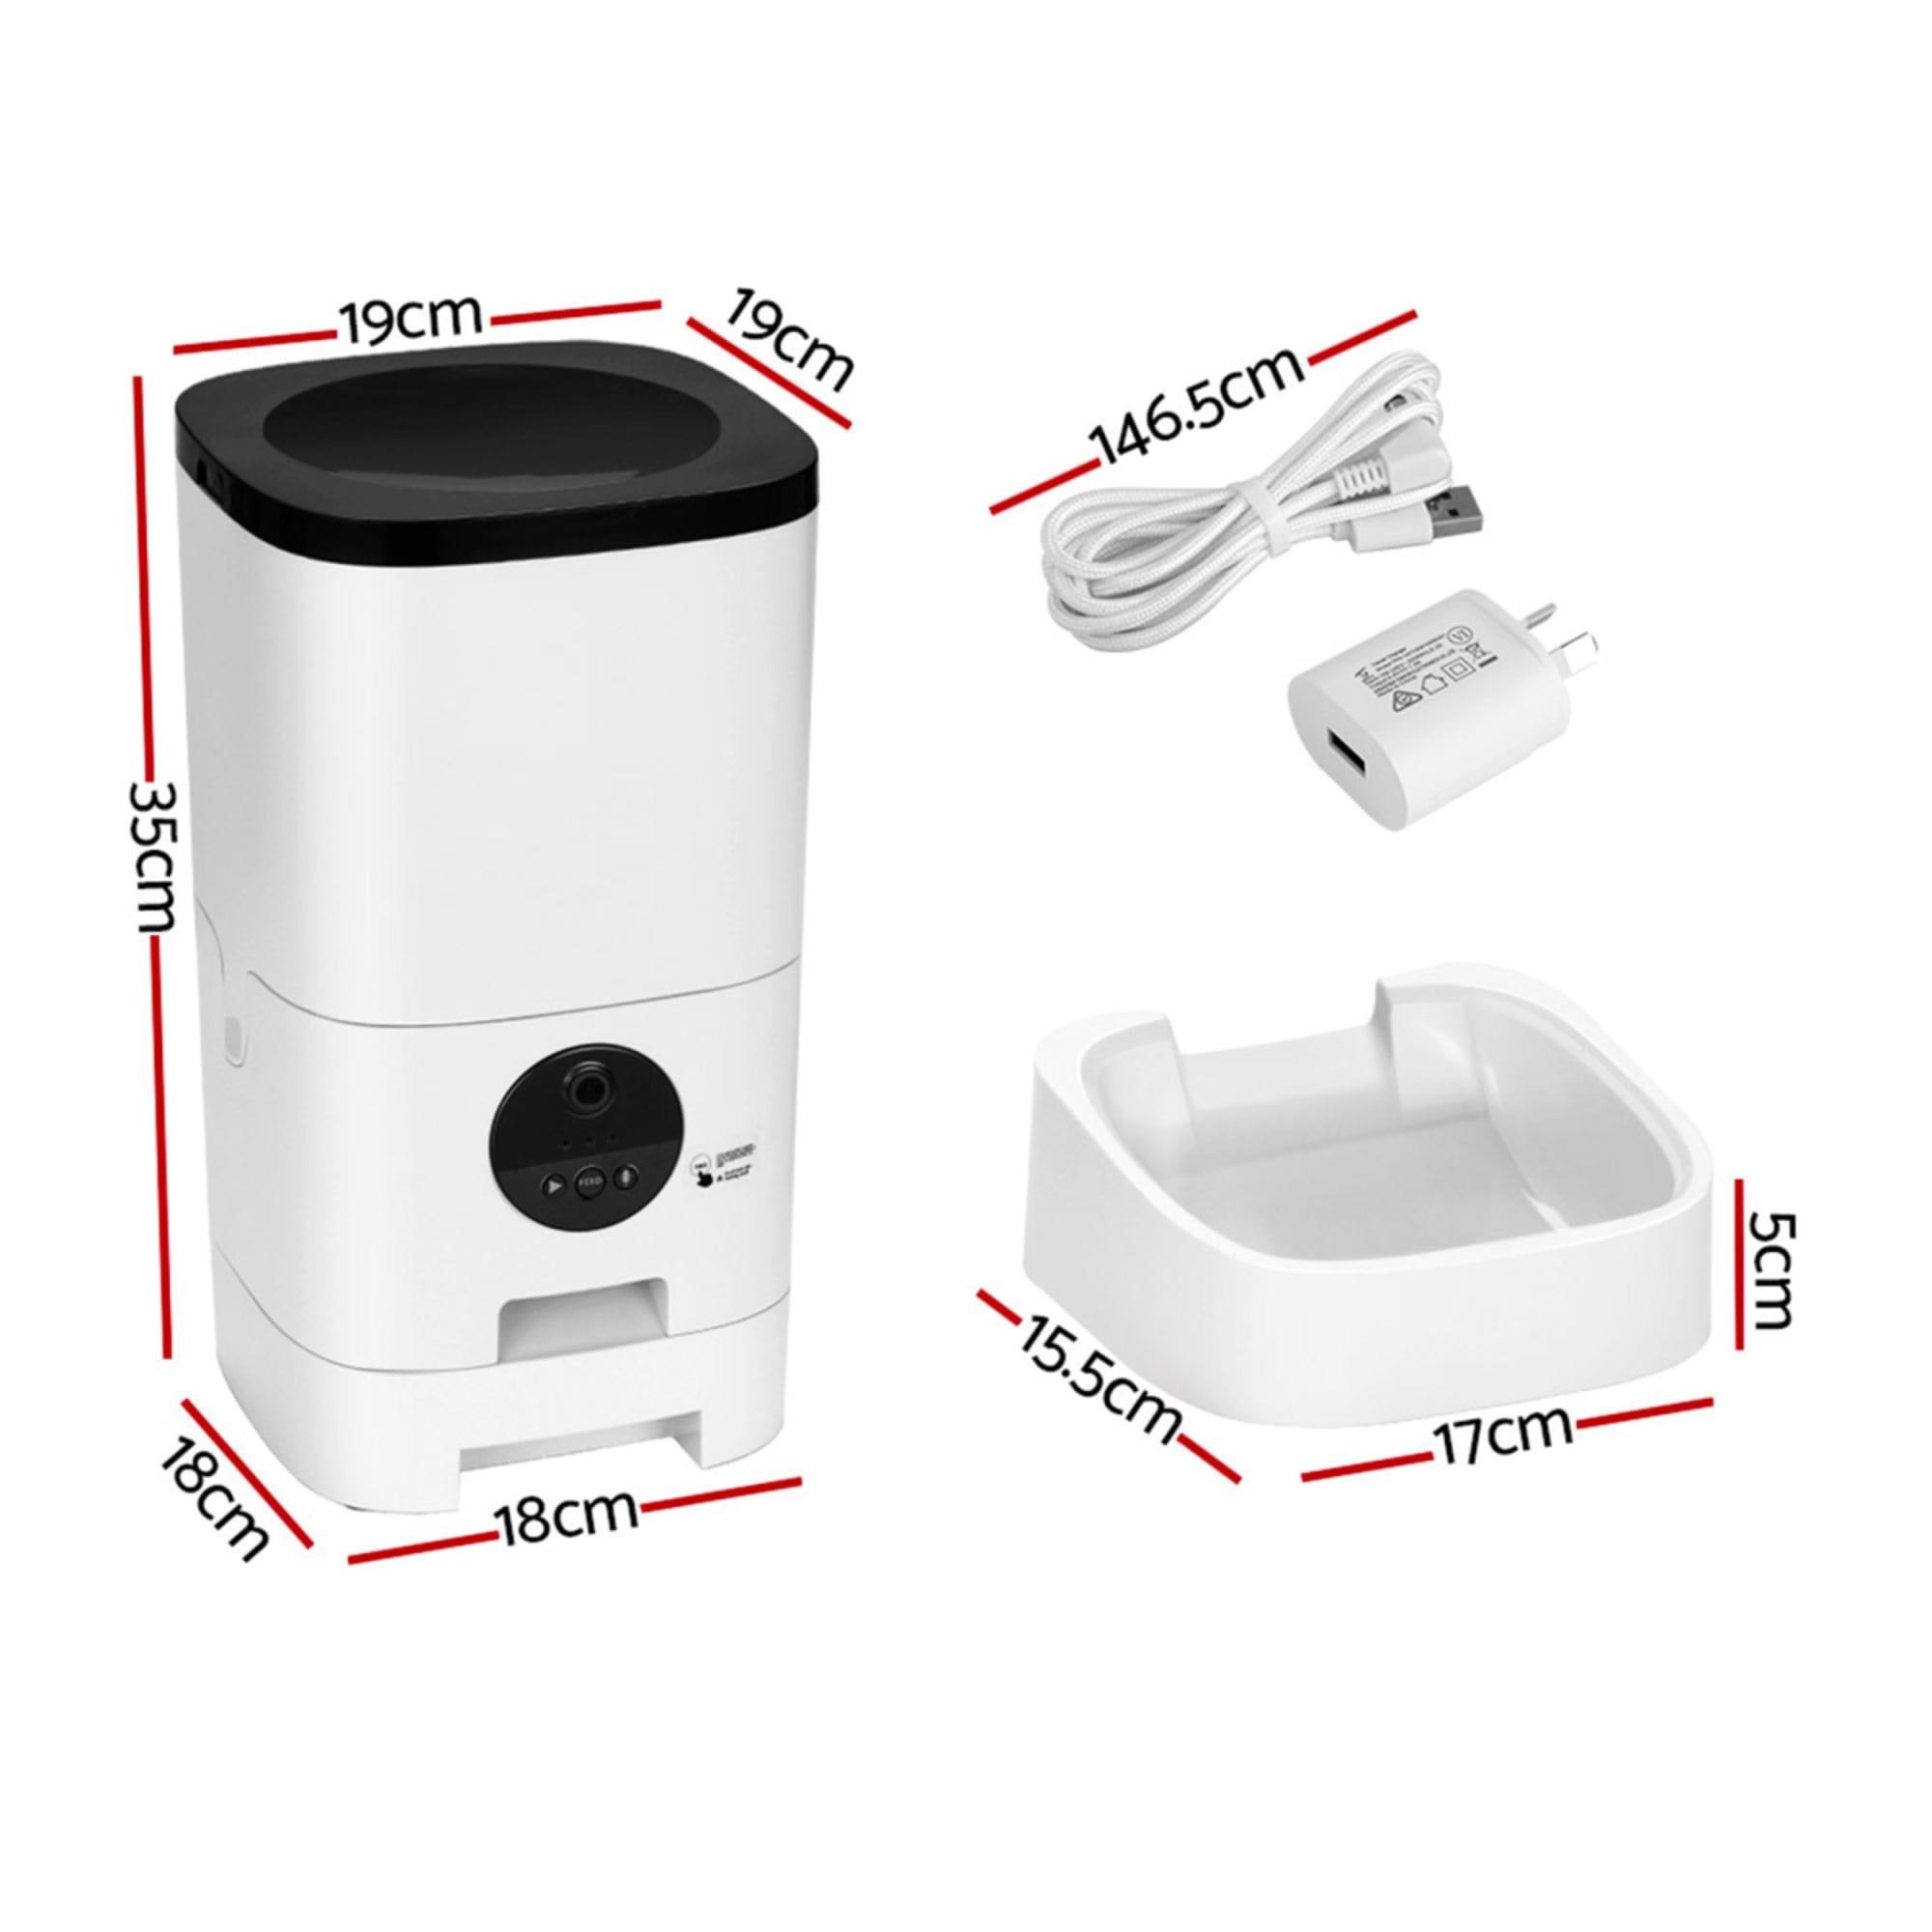 i.Pet Automatic Pet Feeder with WiFi Control 6L Image 4